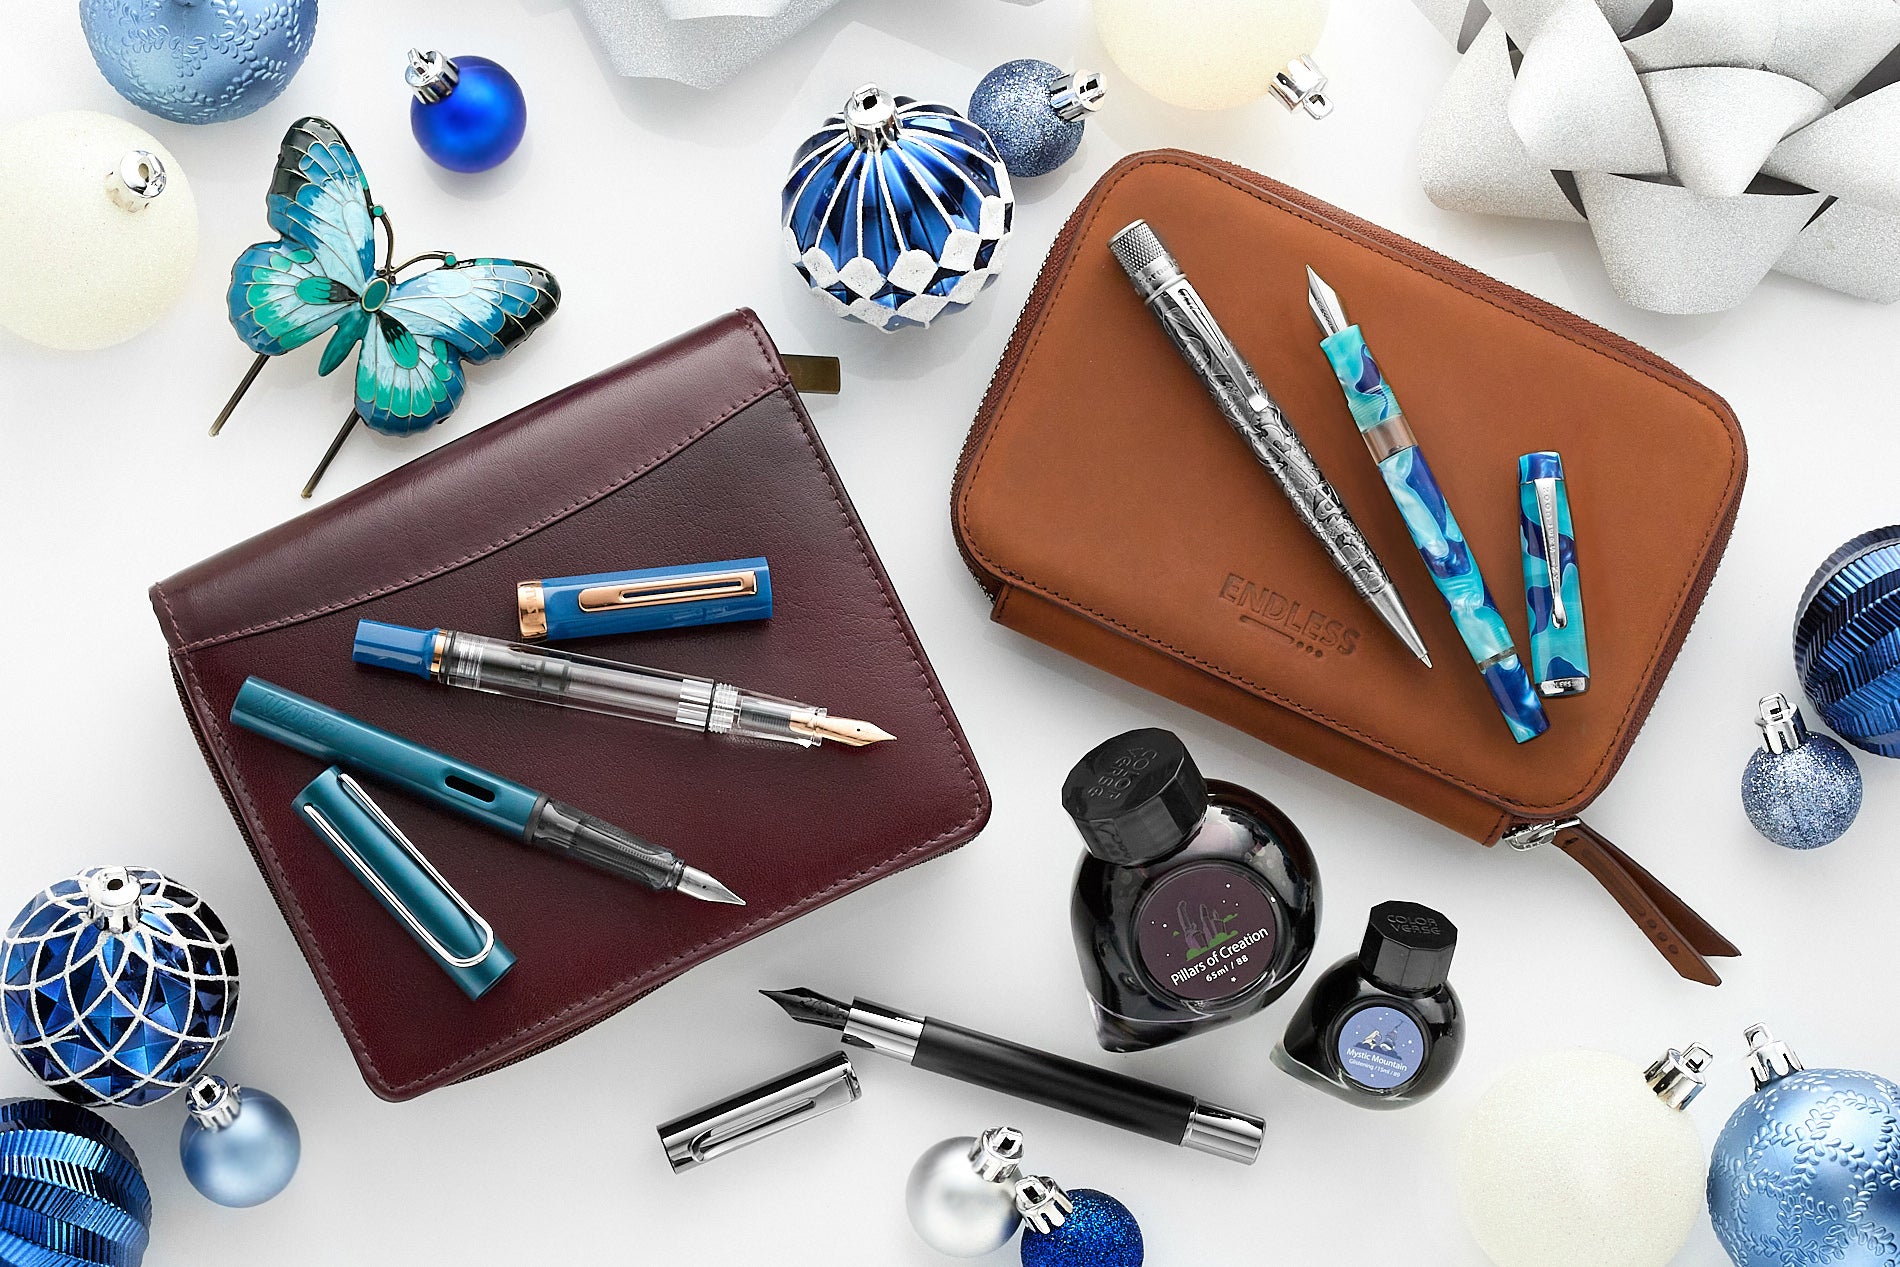 Fountain Pen Gifts under $50